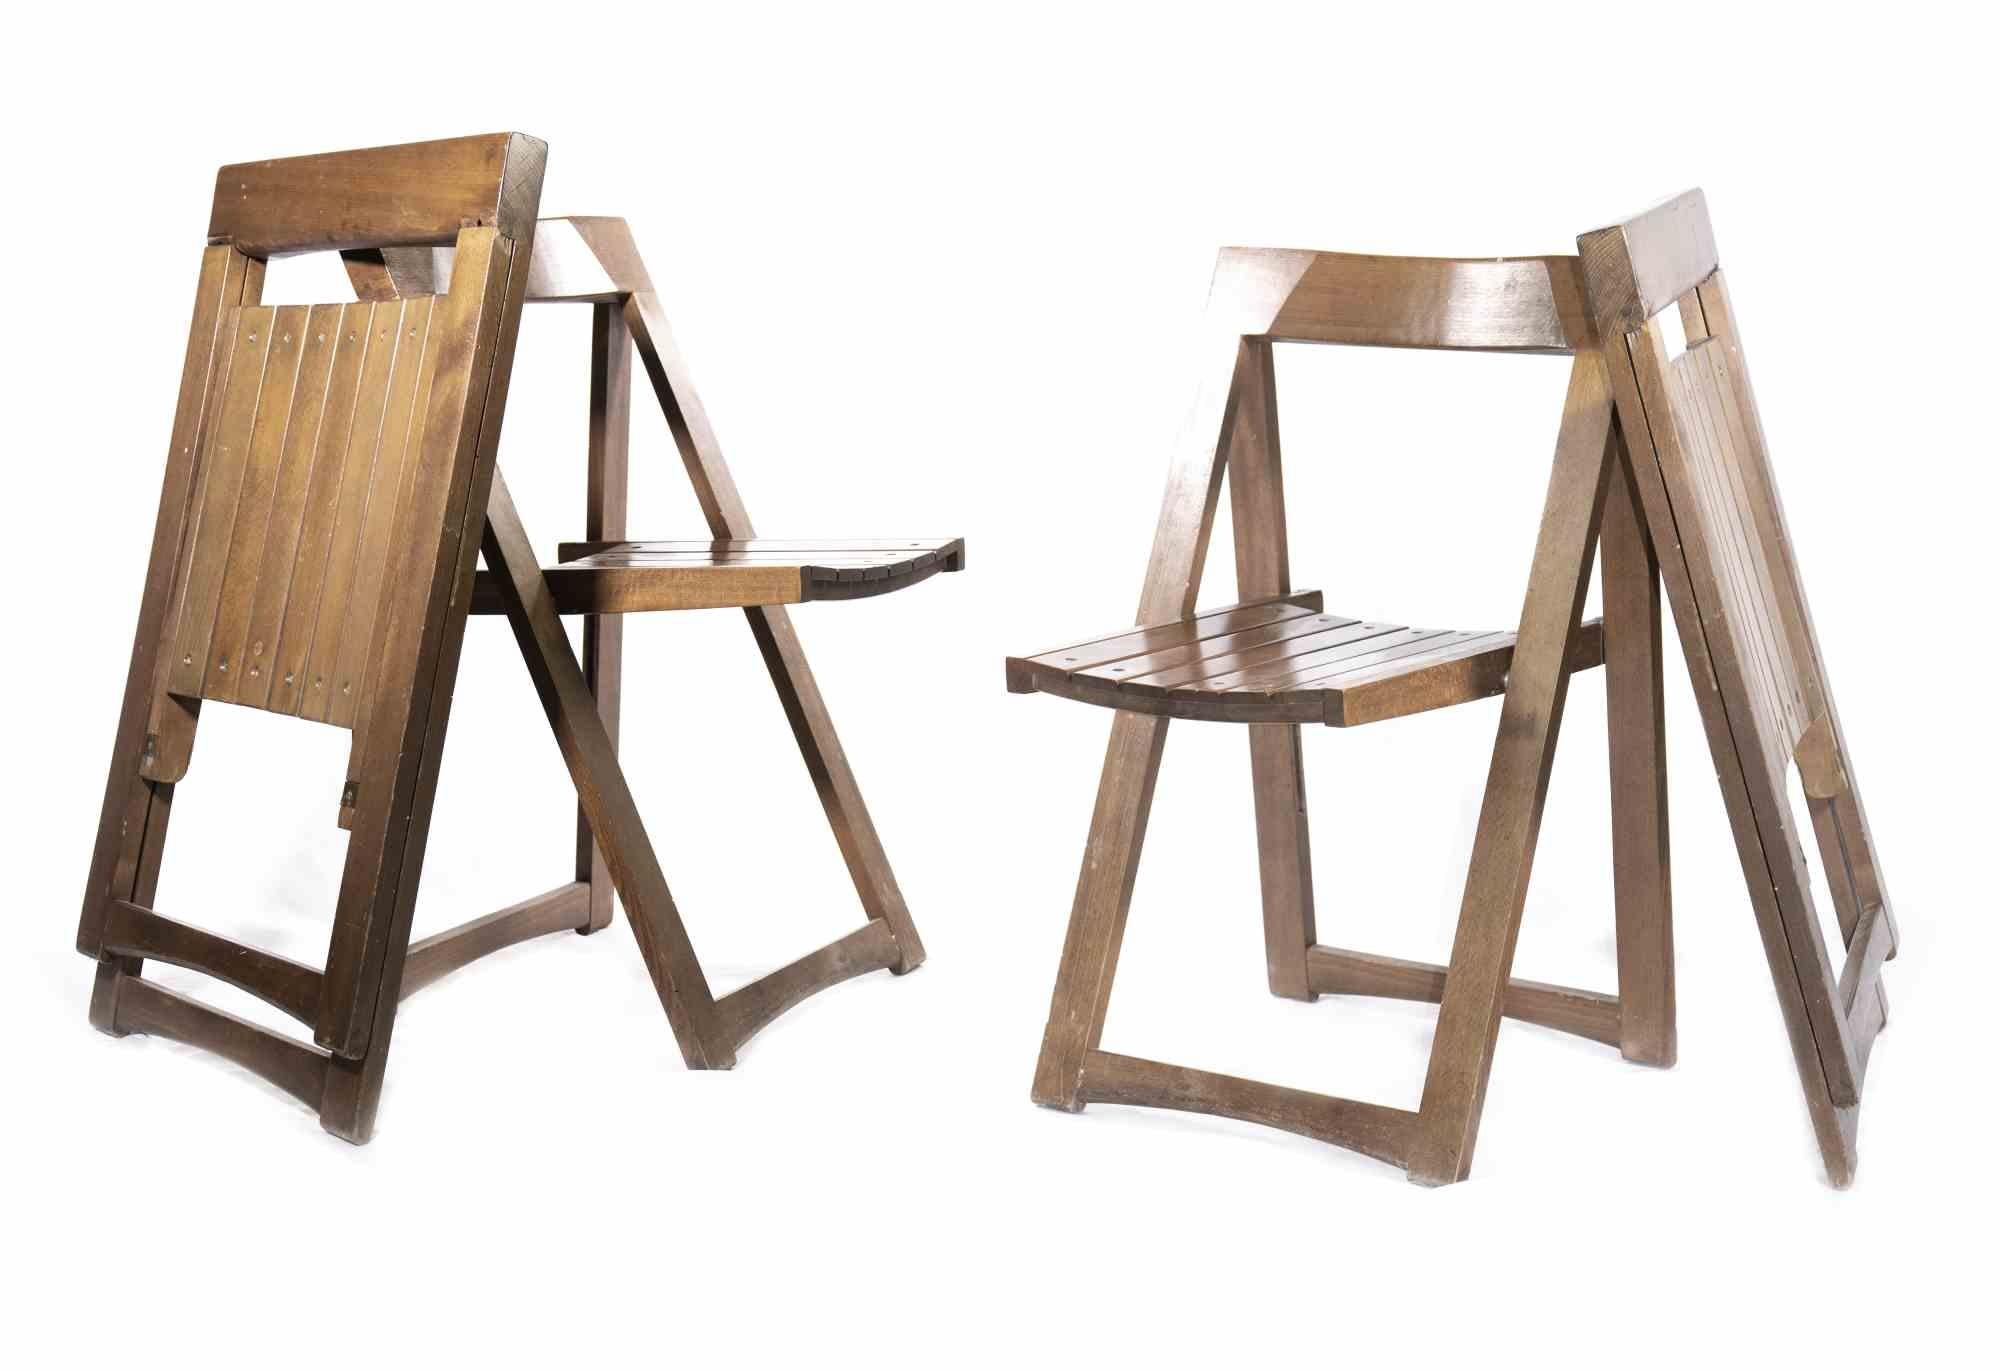 Set of Trieste chairs is an original furniture seating set realized in the style of Aldo Jacober in the 1960s.

Model Trieste. Produced by Bazzani. The set is composed by 4 chairs, entirely realized in wood.

Dimensions: 76 x 45 x 47 cm (each